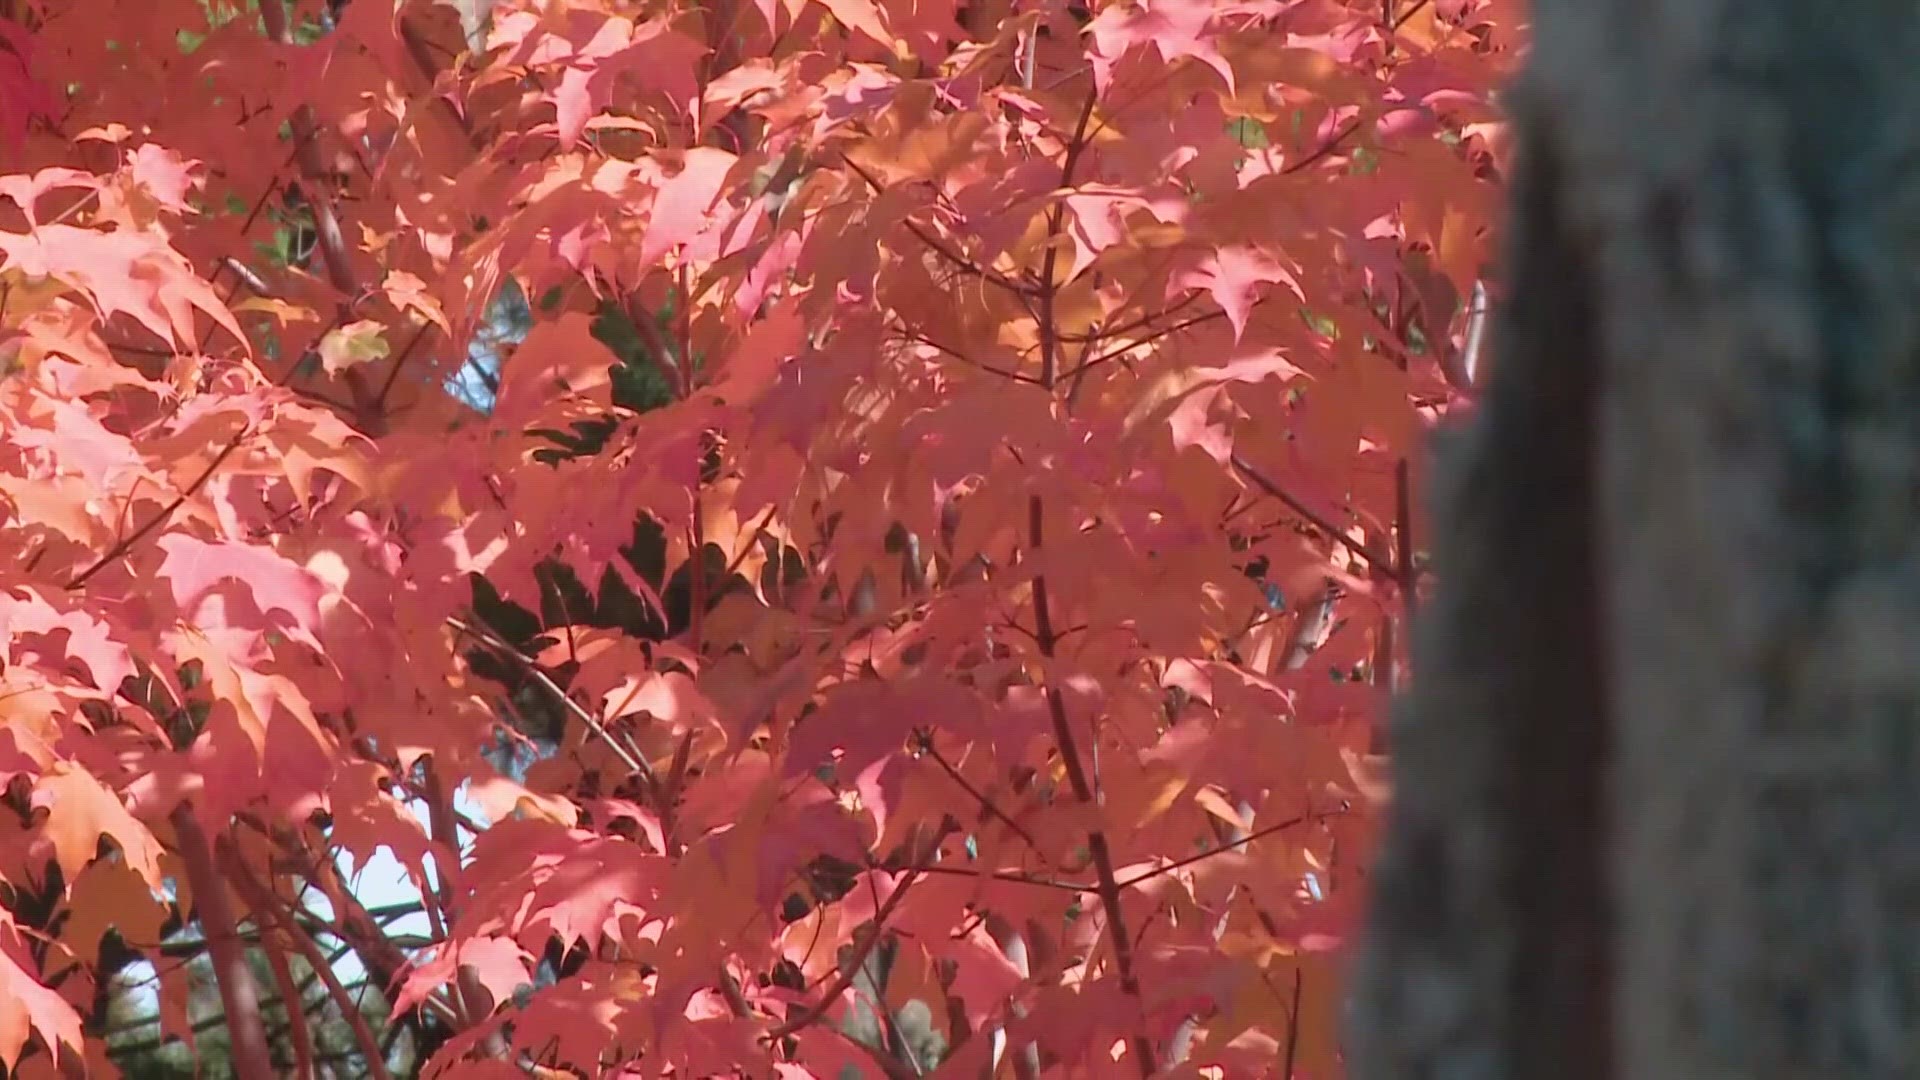 It was a rainy summer, and that's going to affect how the leaves change color this year.